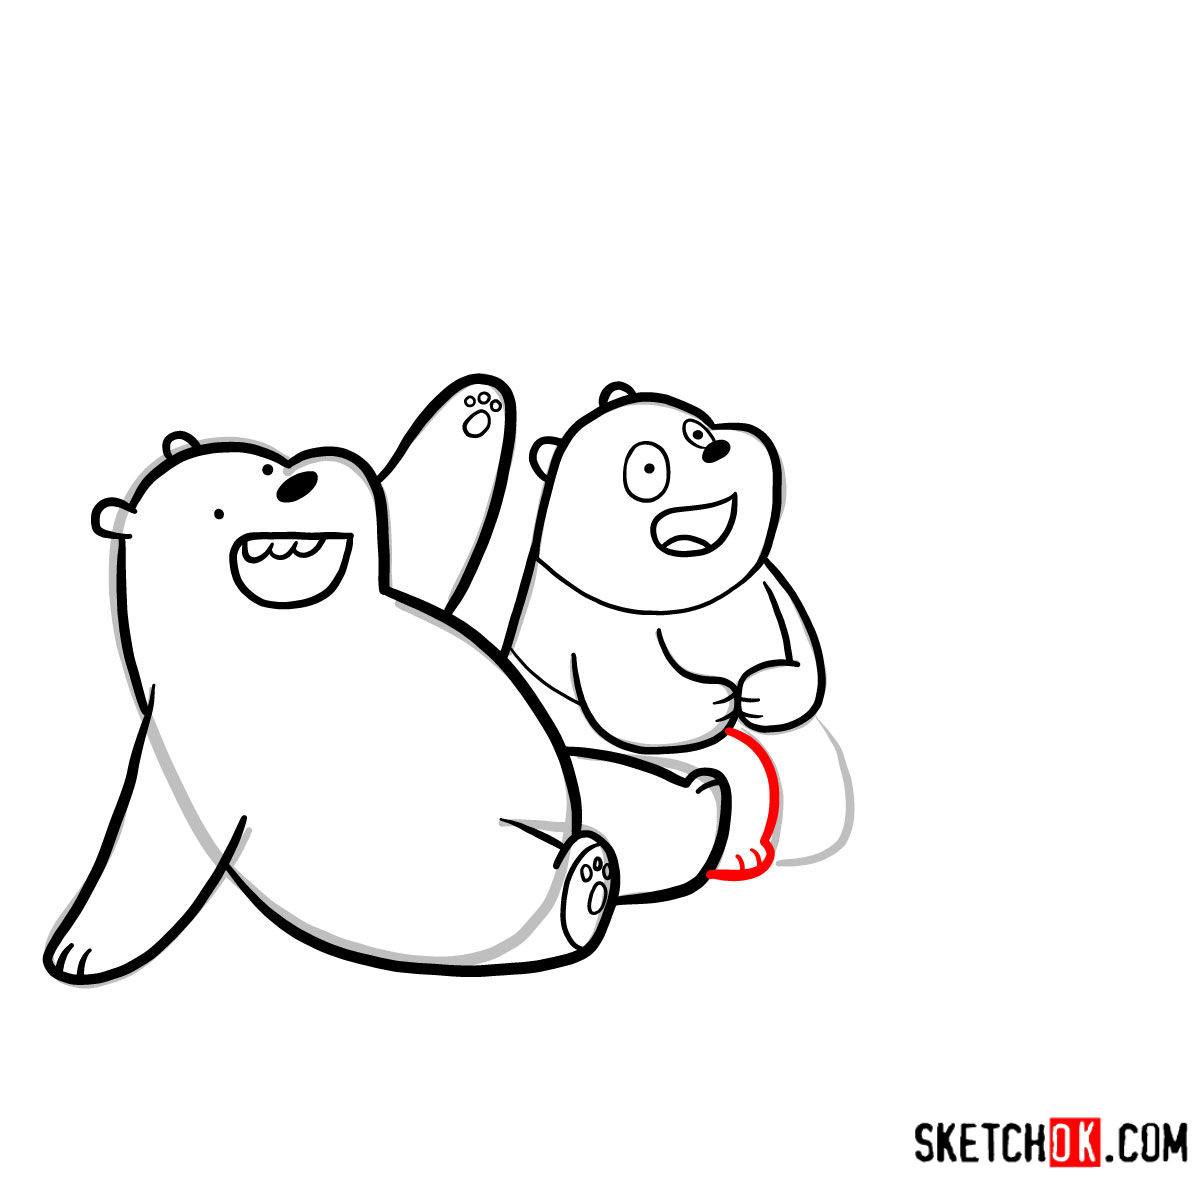 How to draw all three bears together | We Bare Bears - step 13